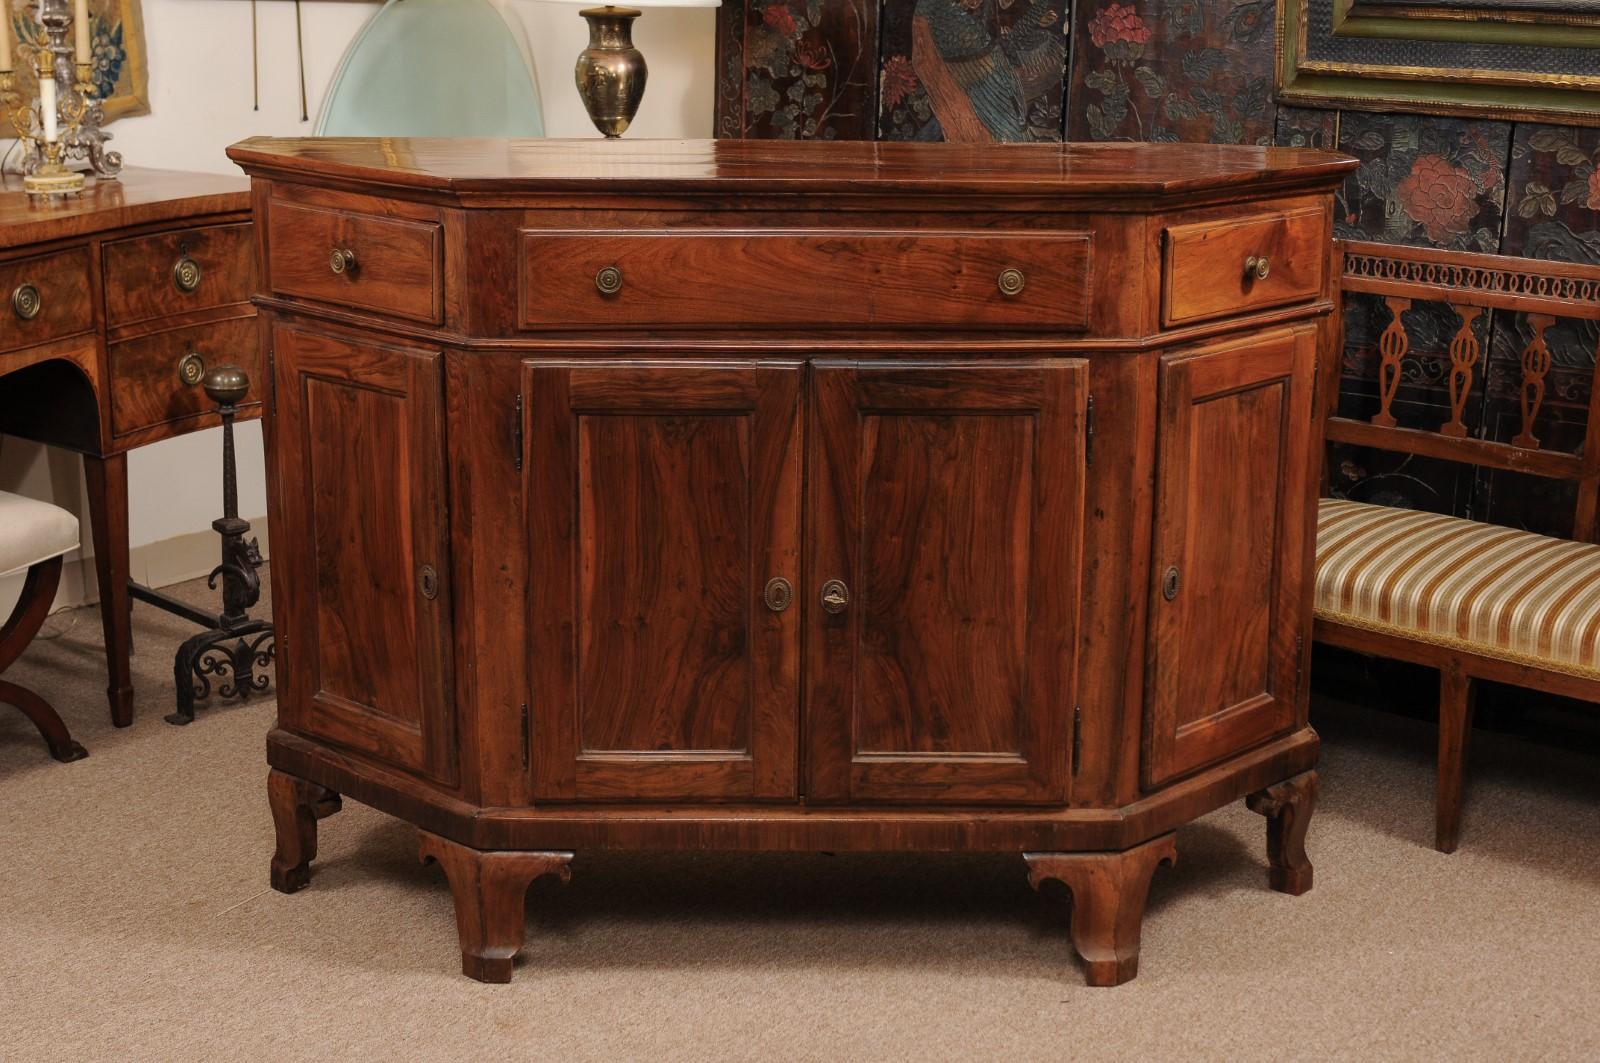 The early 19th century Italian credenza in walnut with canted sides, 3 drawers with brass pulls and 4 paneled doors below terminating in shaped feet.